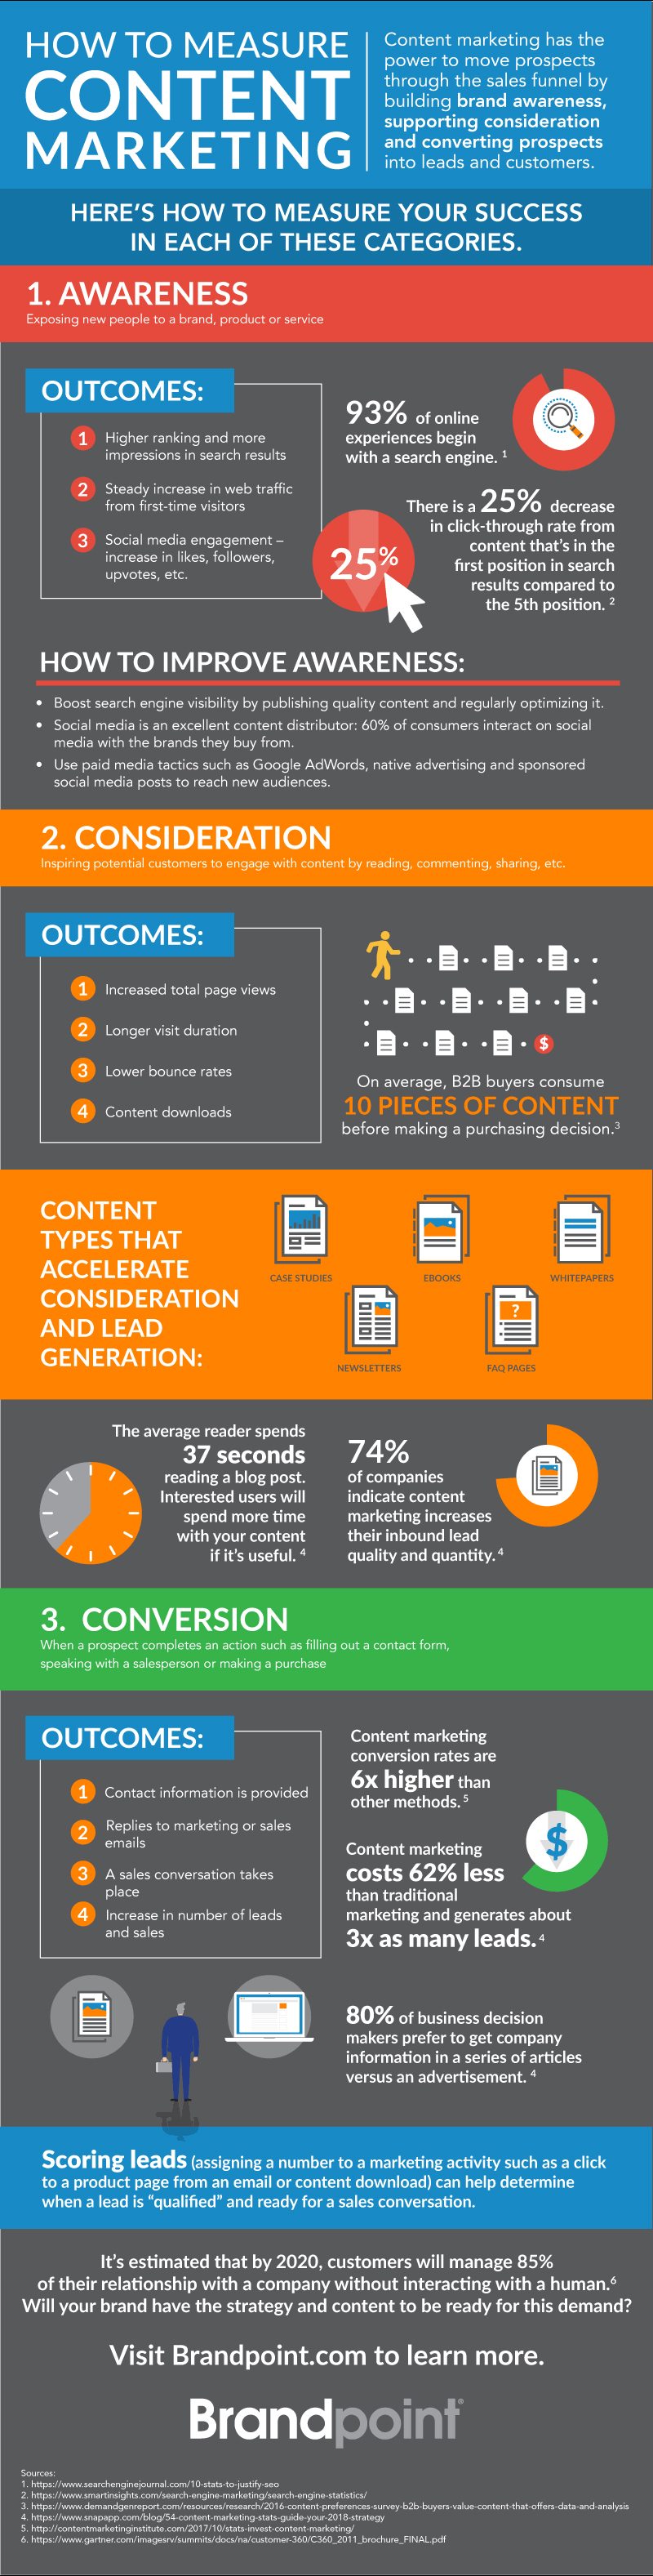 How to Measure Content Marketing [INFOGRAPHIC]